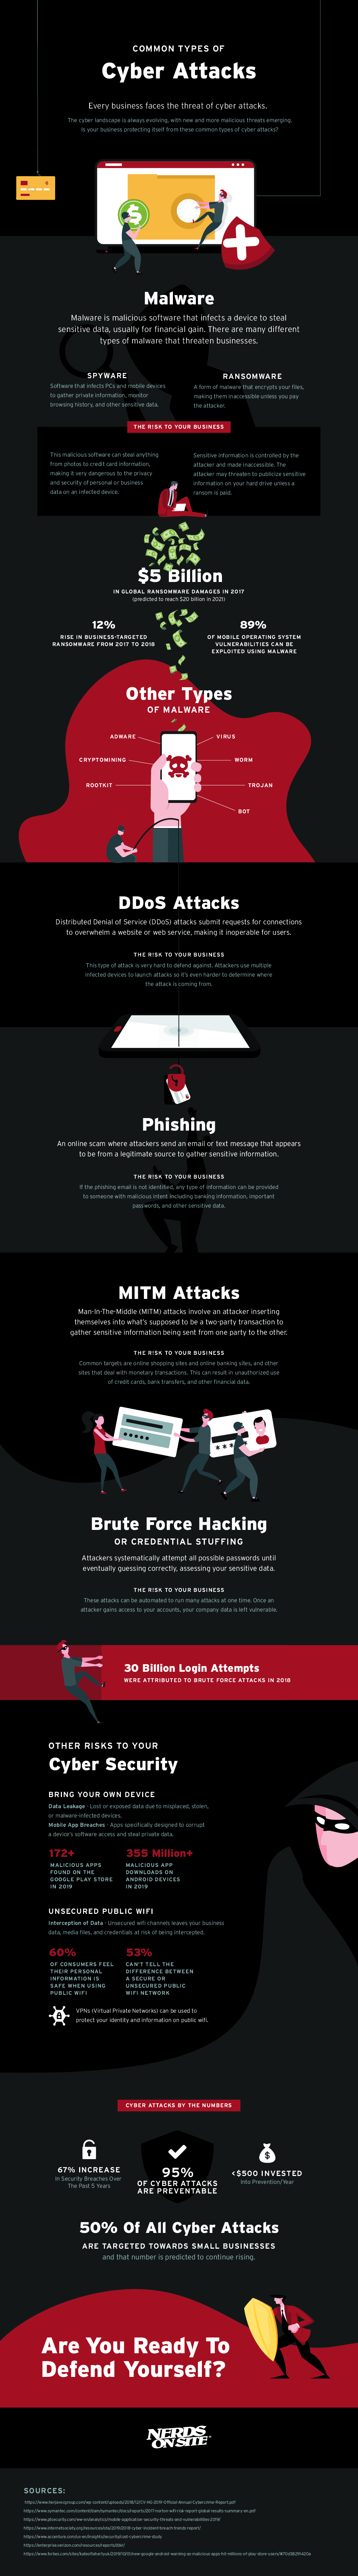 Types Of Cyber Attacks Infographic